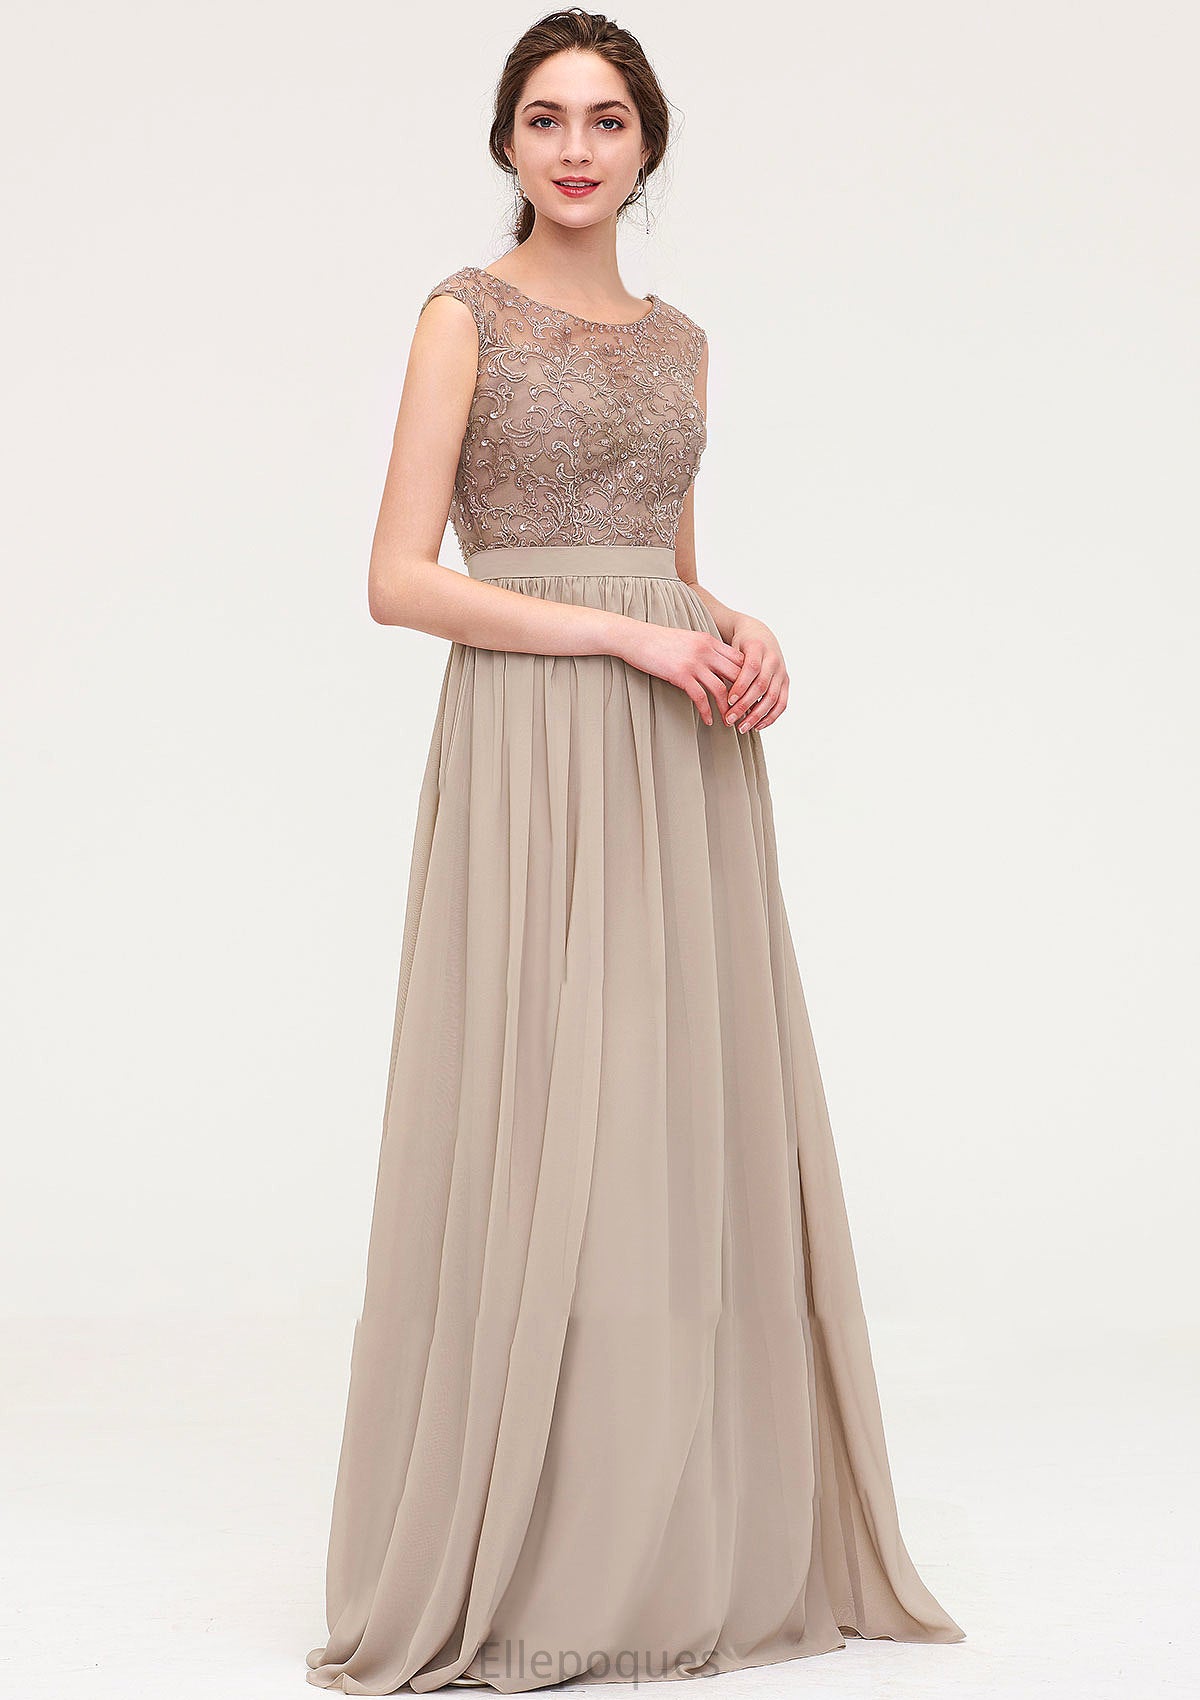 Sleeveless Scoop Neck Long/Floor-Length Chiffon A-line/Princess Bridesmaid Dresses With Sequins Beading Lace Pleated Dalia HOP0025493